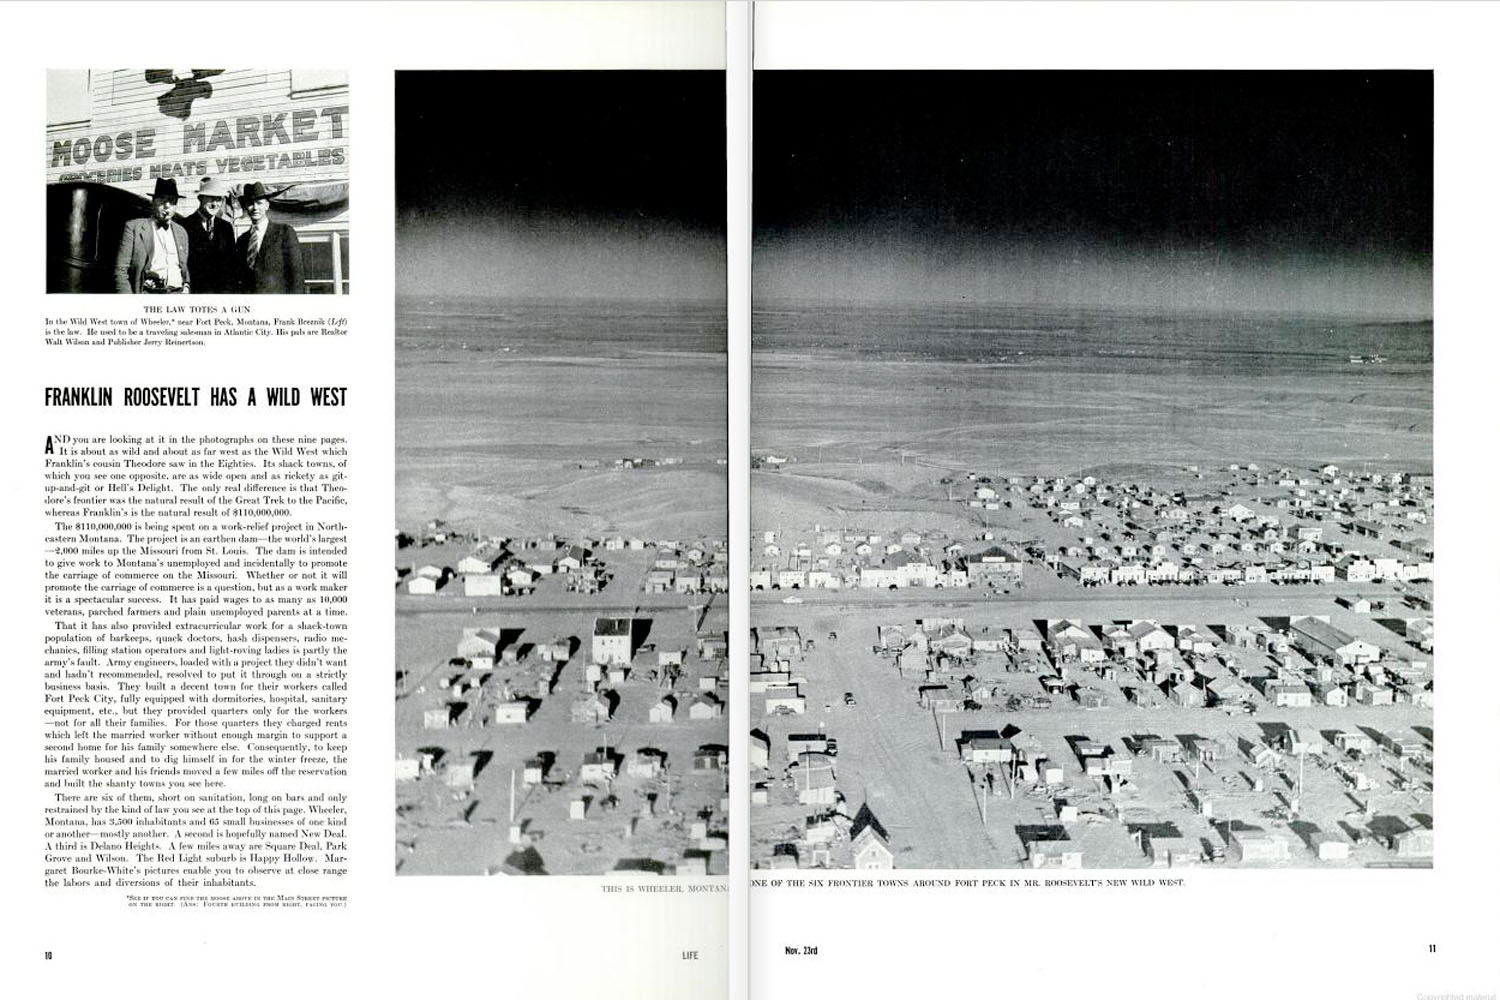 Page spreads from the inaugural, Nov. 23, 1936, issue of LIFE magazine.